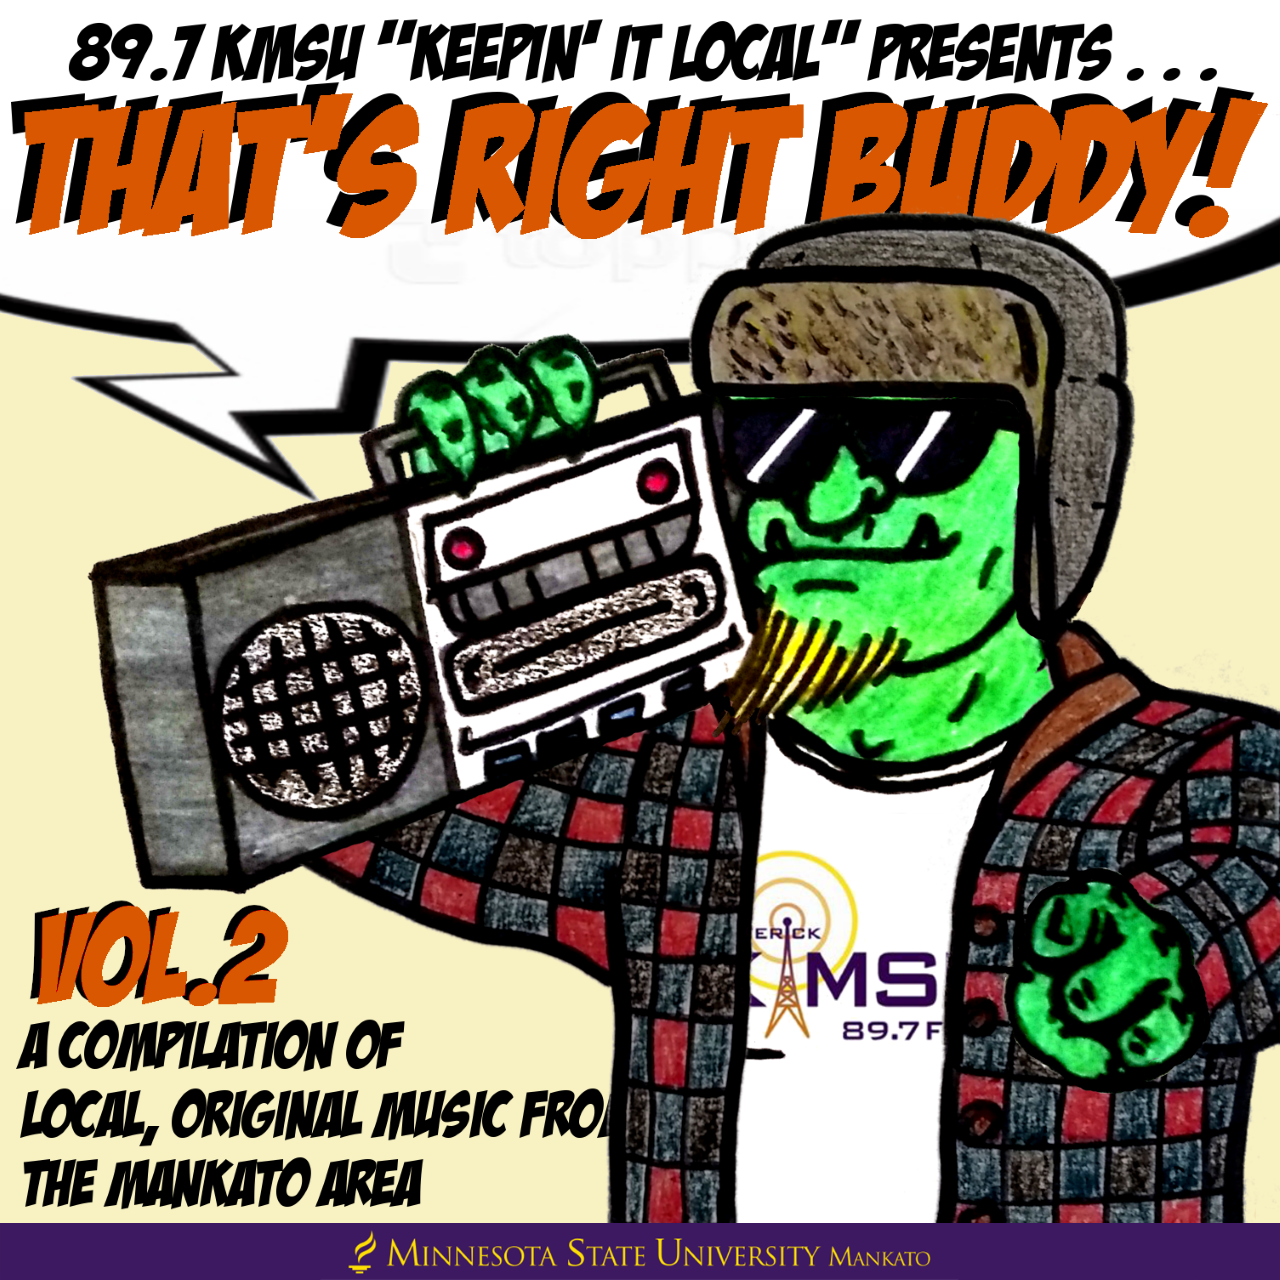 Keepin' It Local CD cover